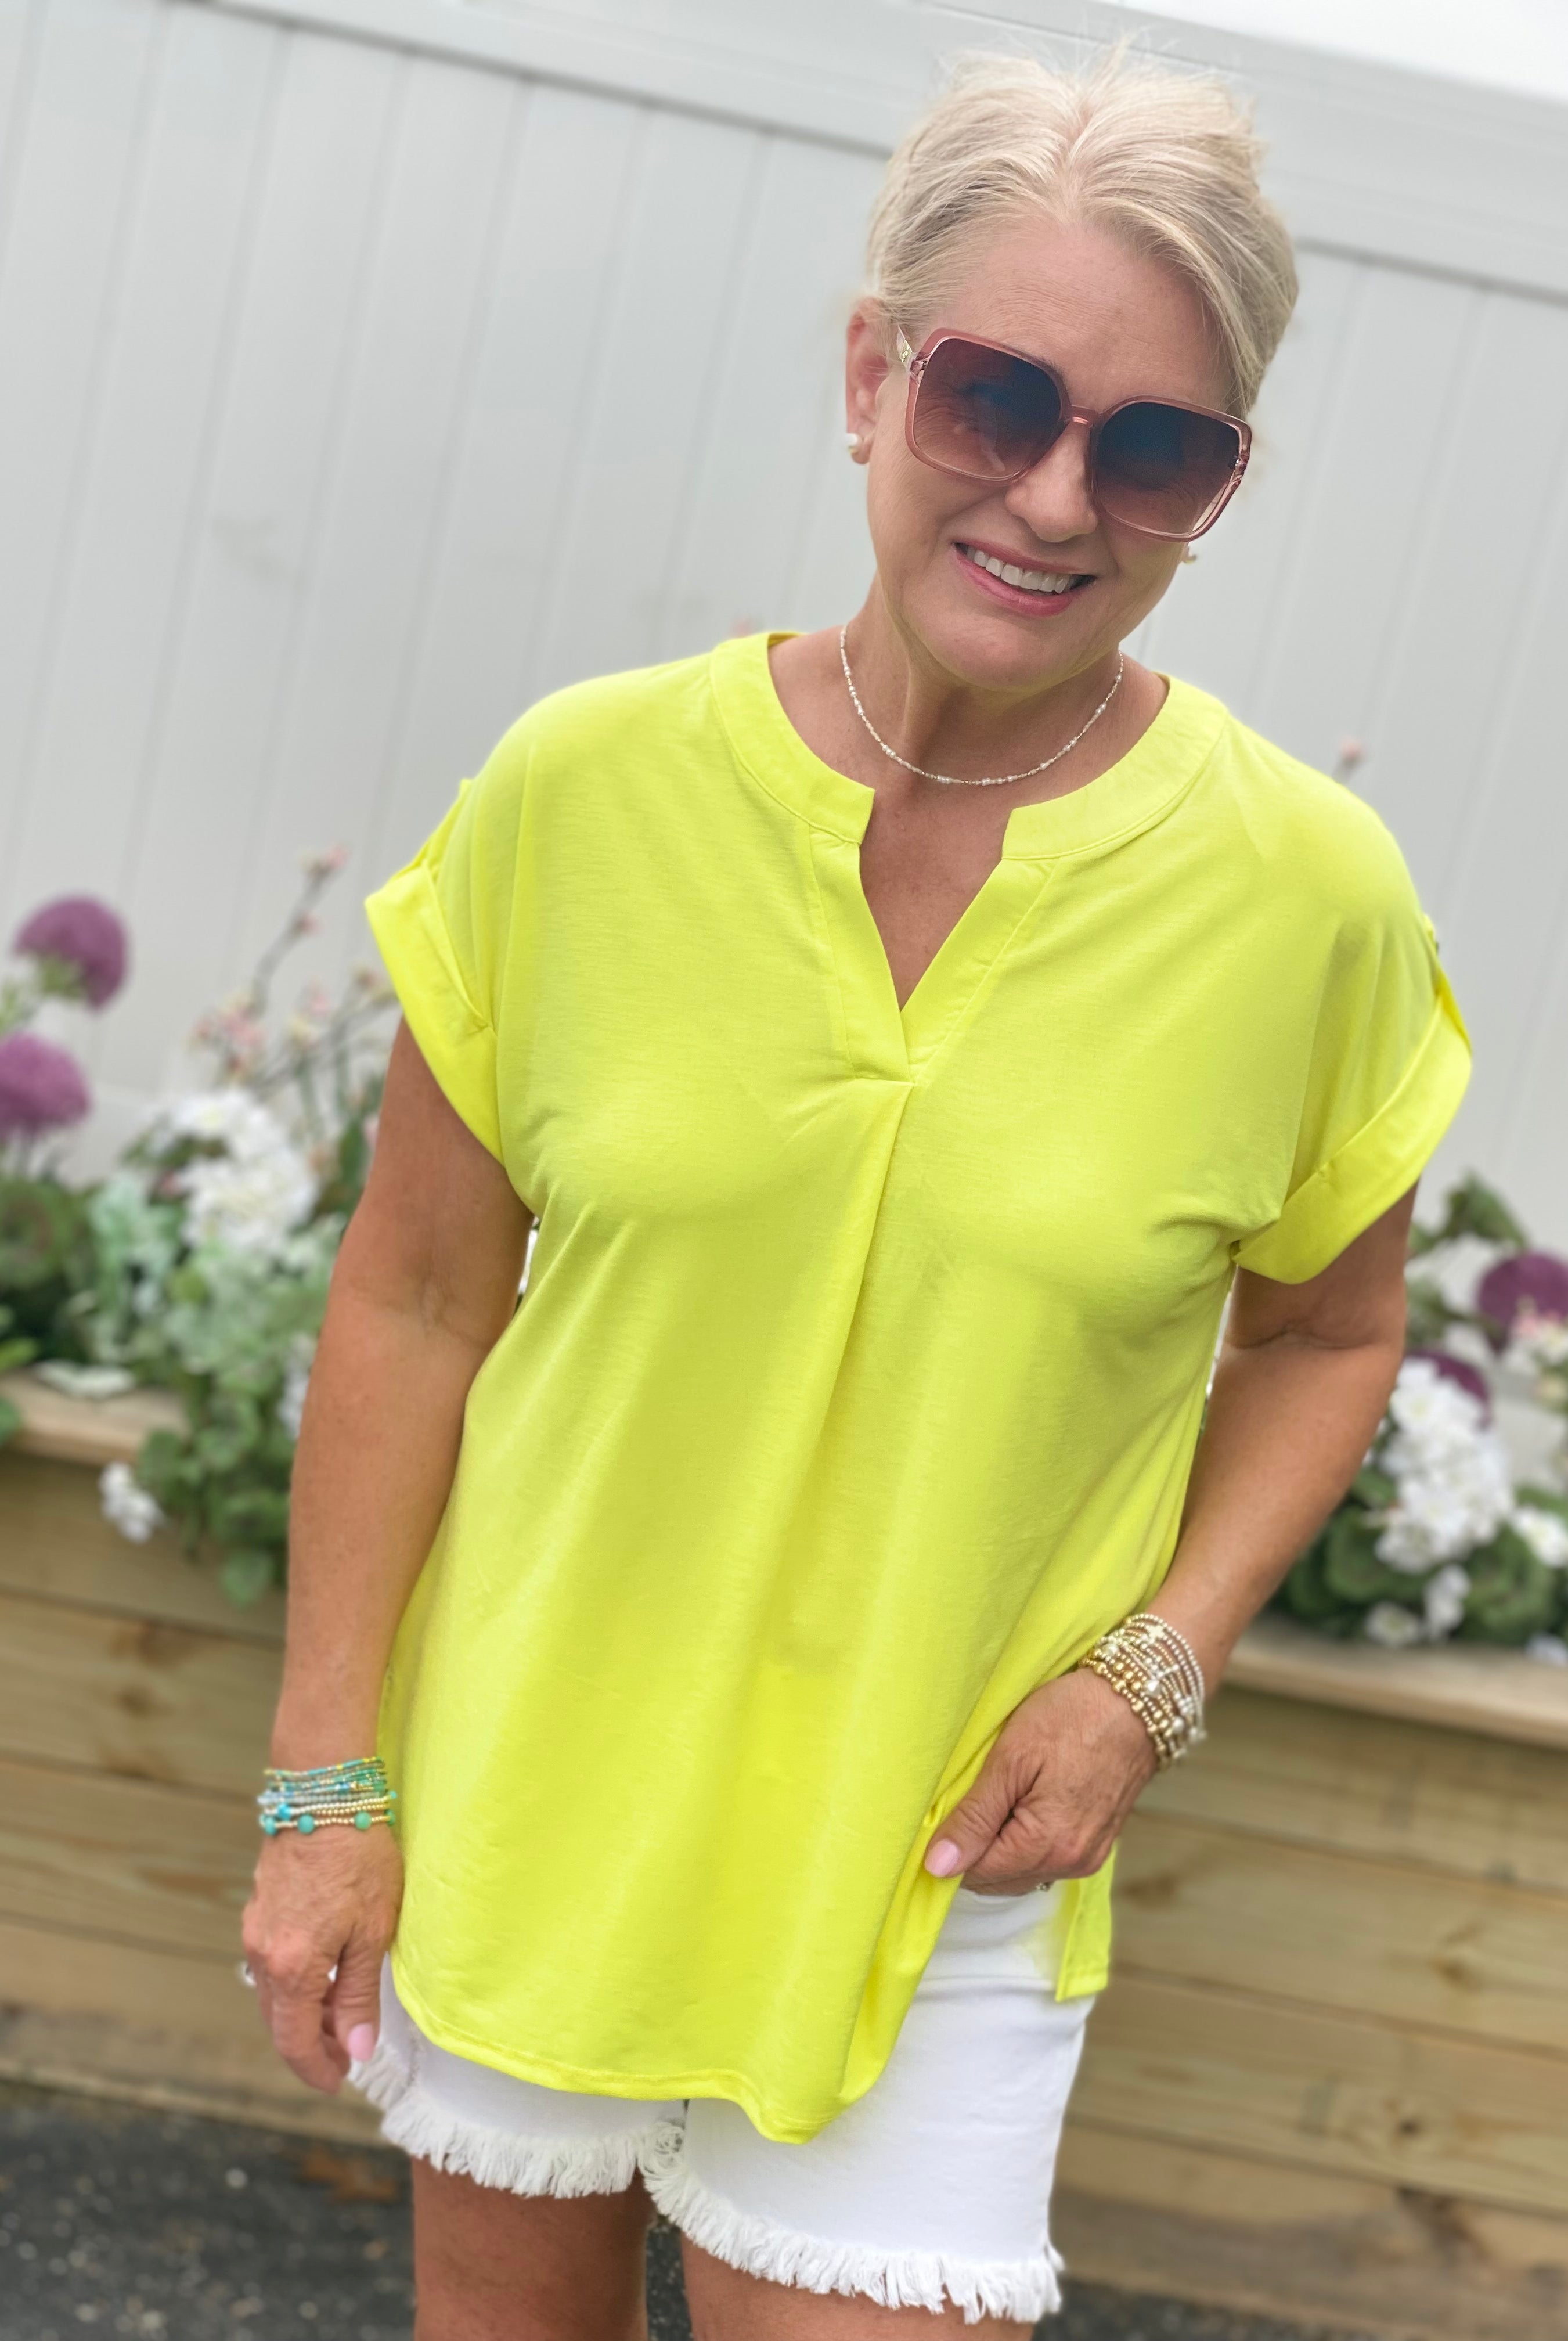 Bright & Beautiful Short Sleeve Top - Lemon Zest-Tops-The Lovely Closet-The Lovely Closet, Women's Fashion Boutique in Alexandria, KY